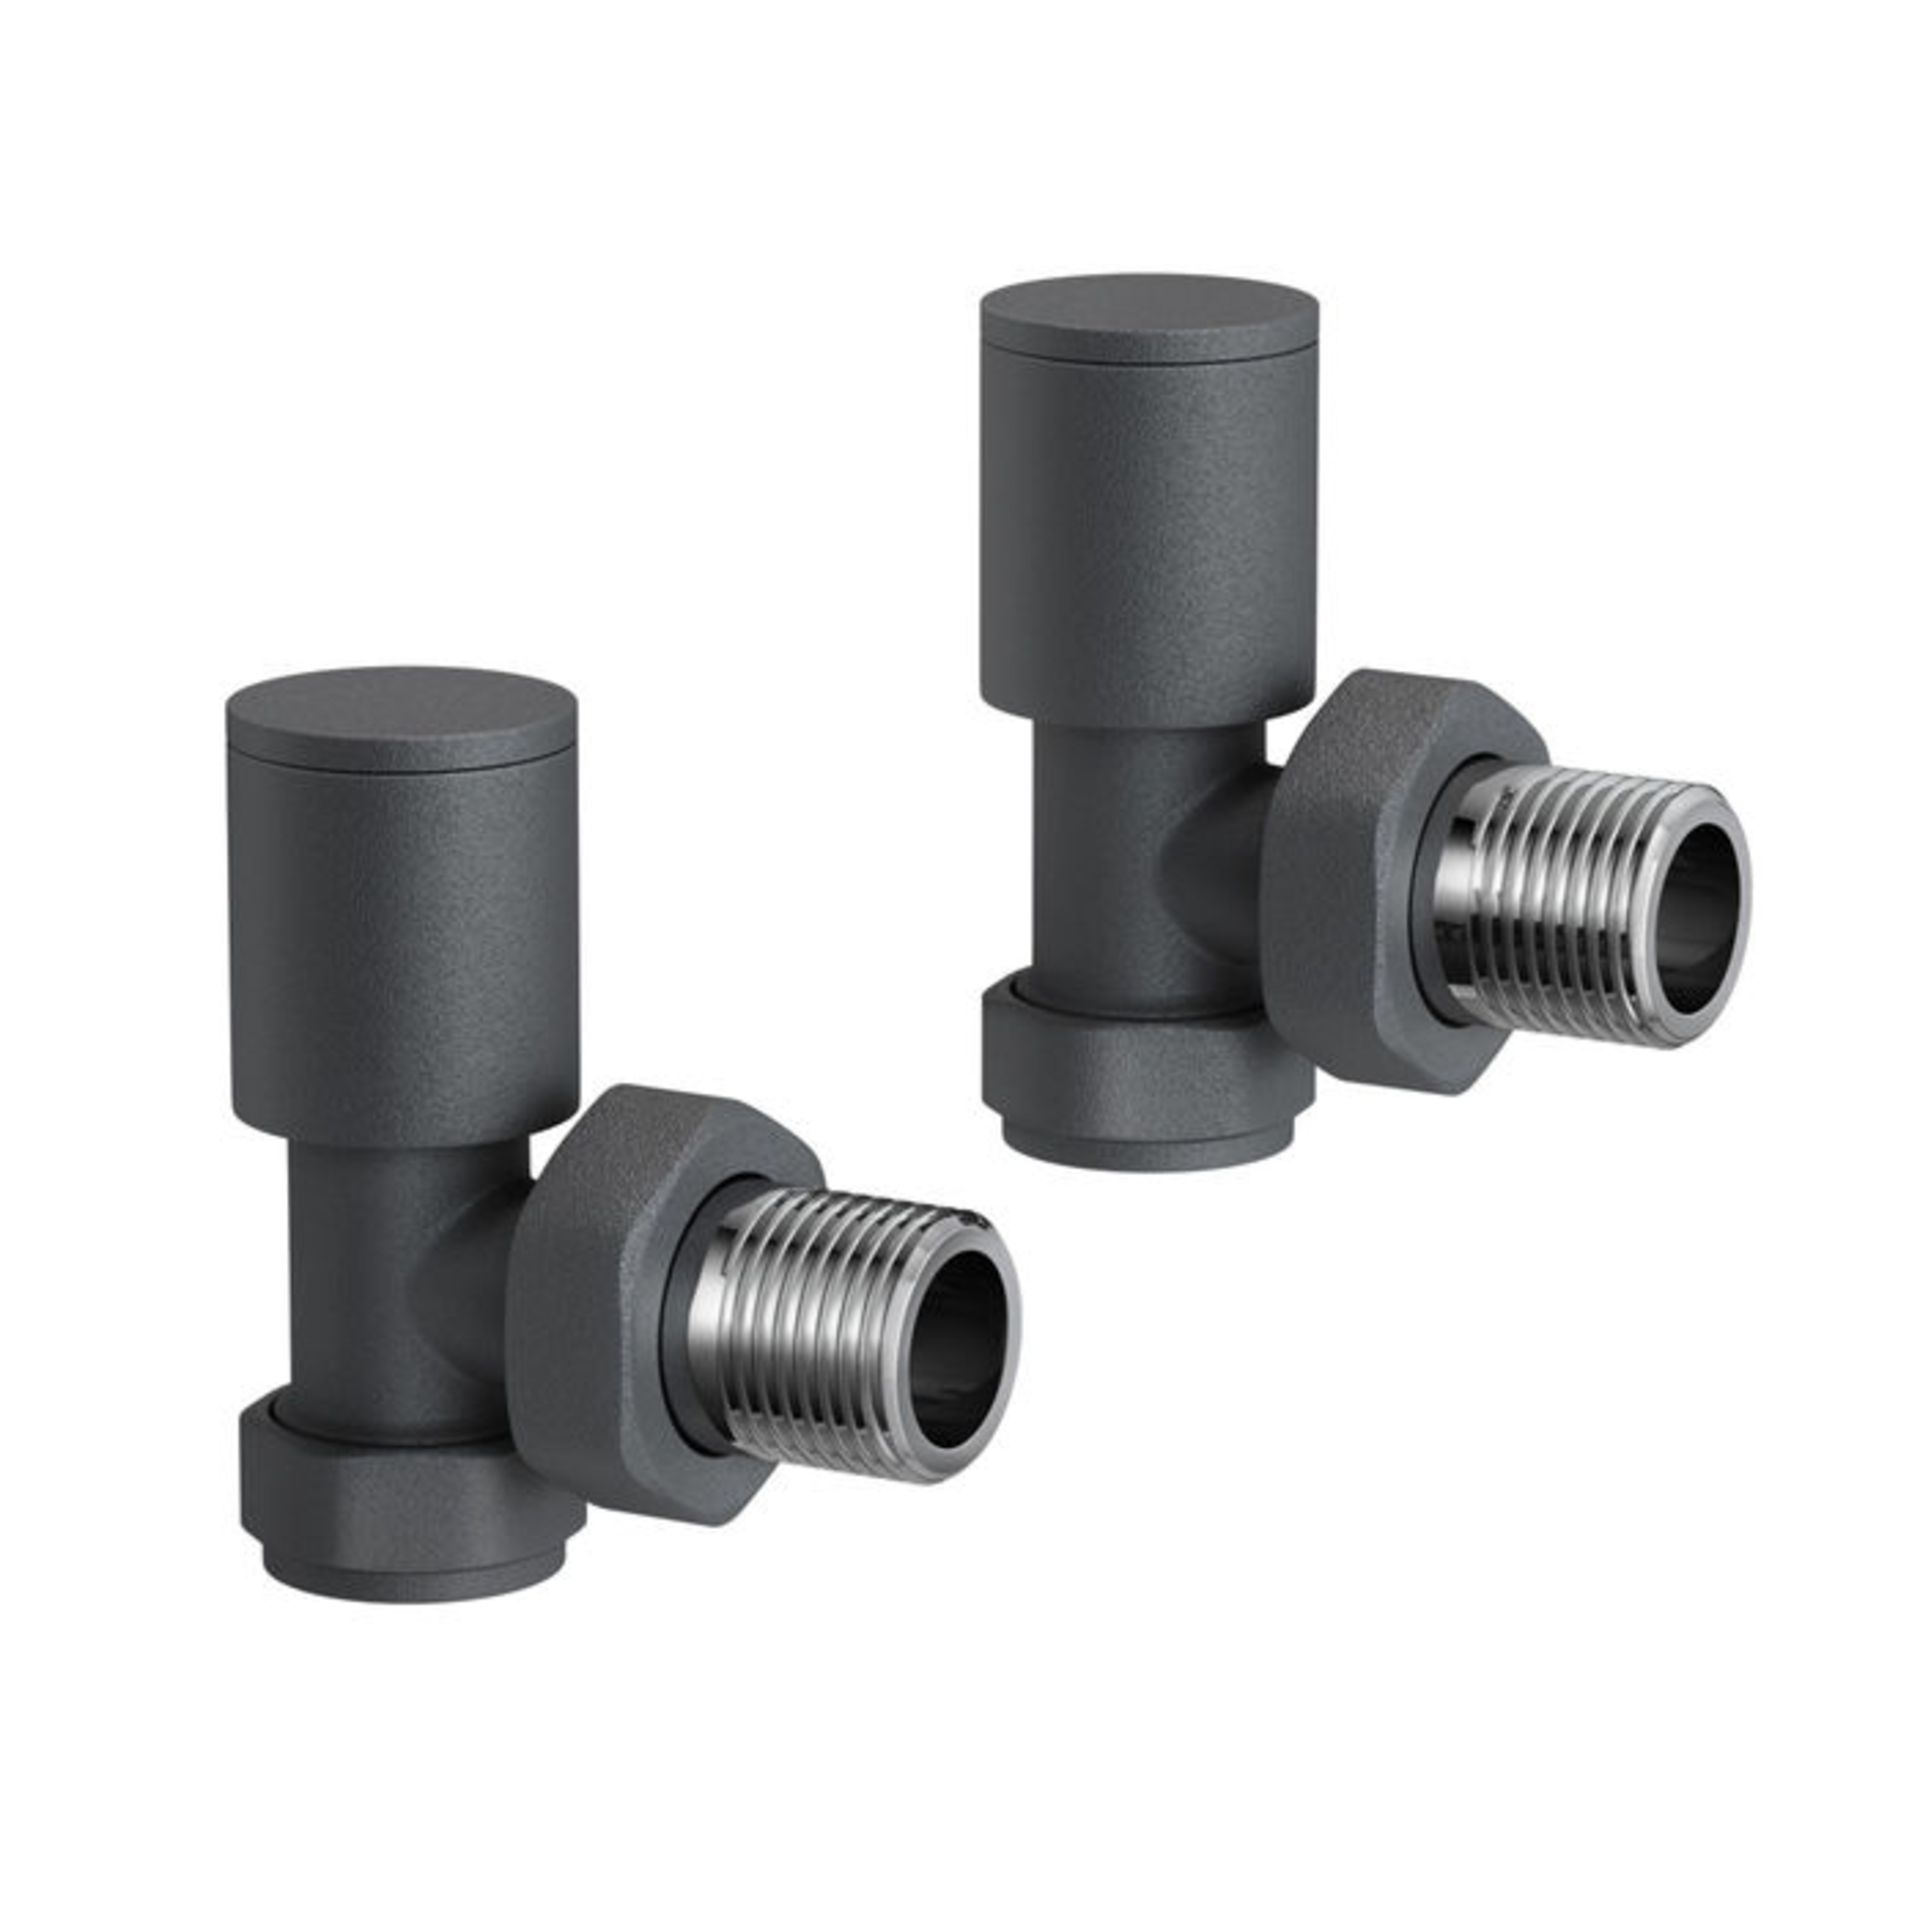 (AL39) Anthracite Standard Connection Angled Radiator Valves 15mm Contemporary anthracite finish